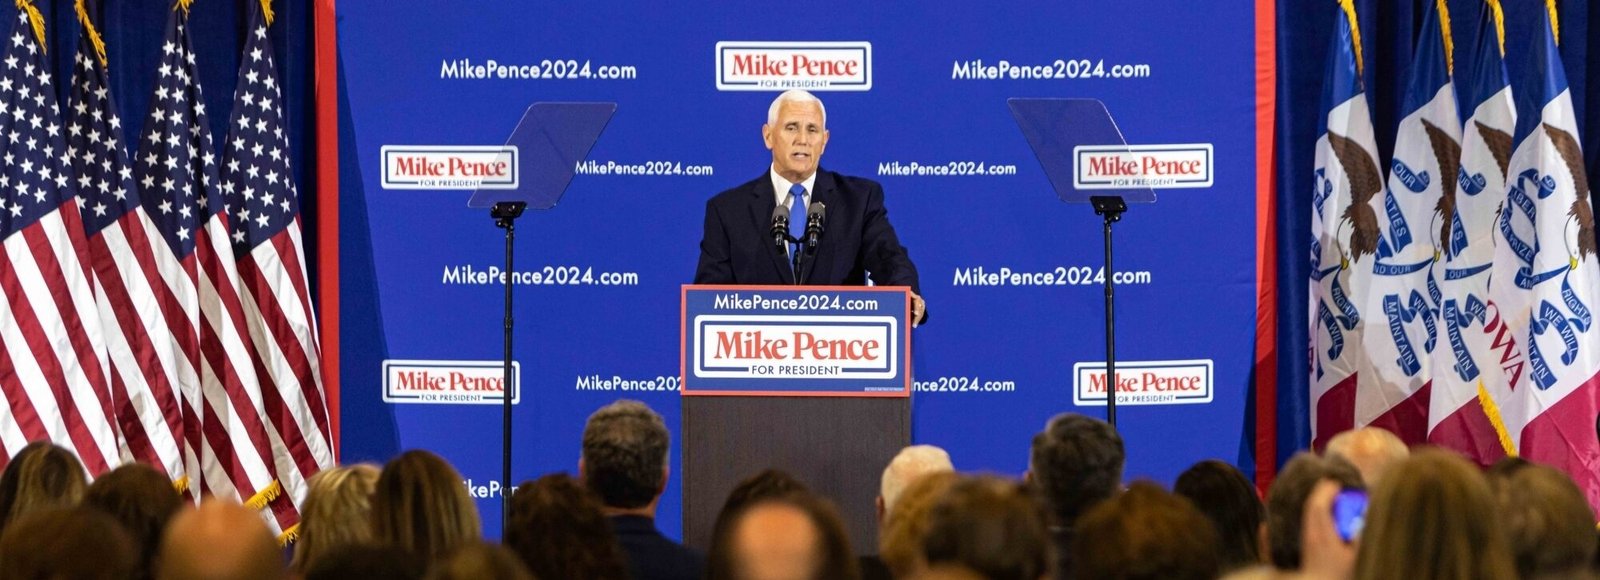 Mike Pence launches 2024 campaign